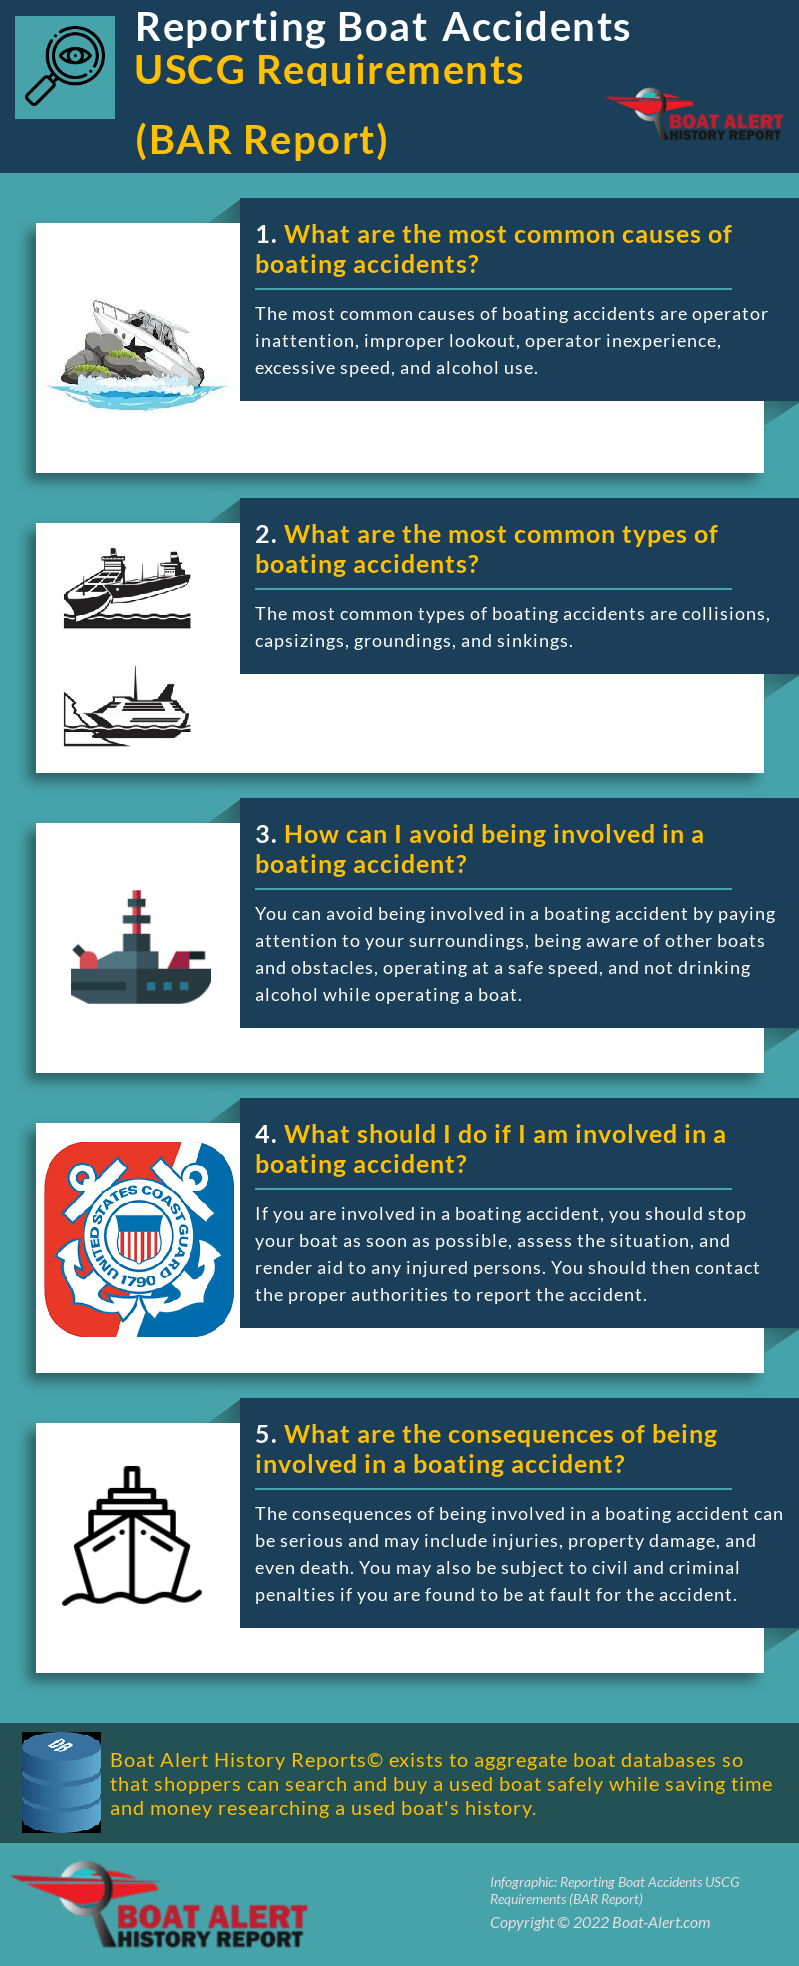 Infographic: Reporting a boat accident to the USCG